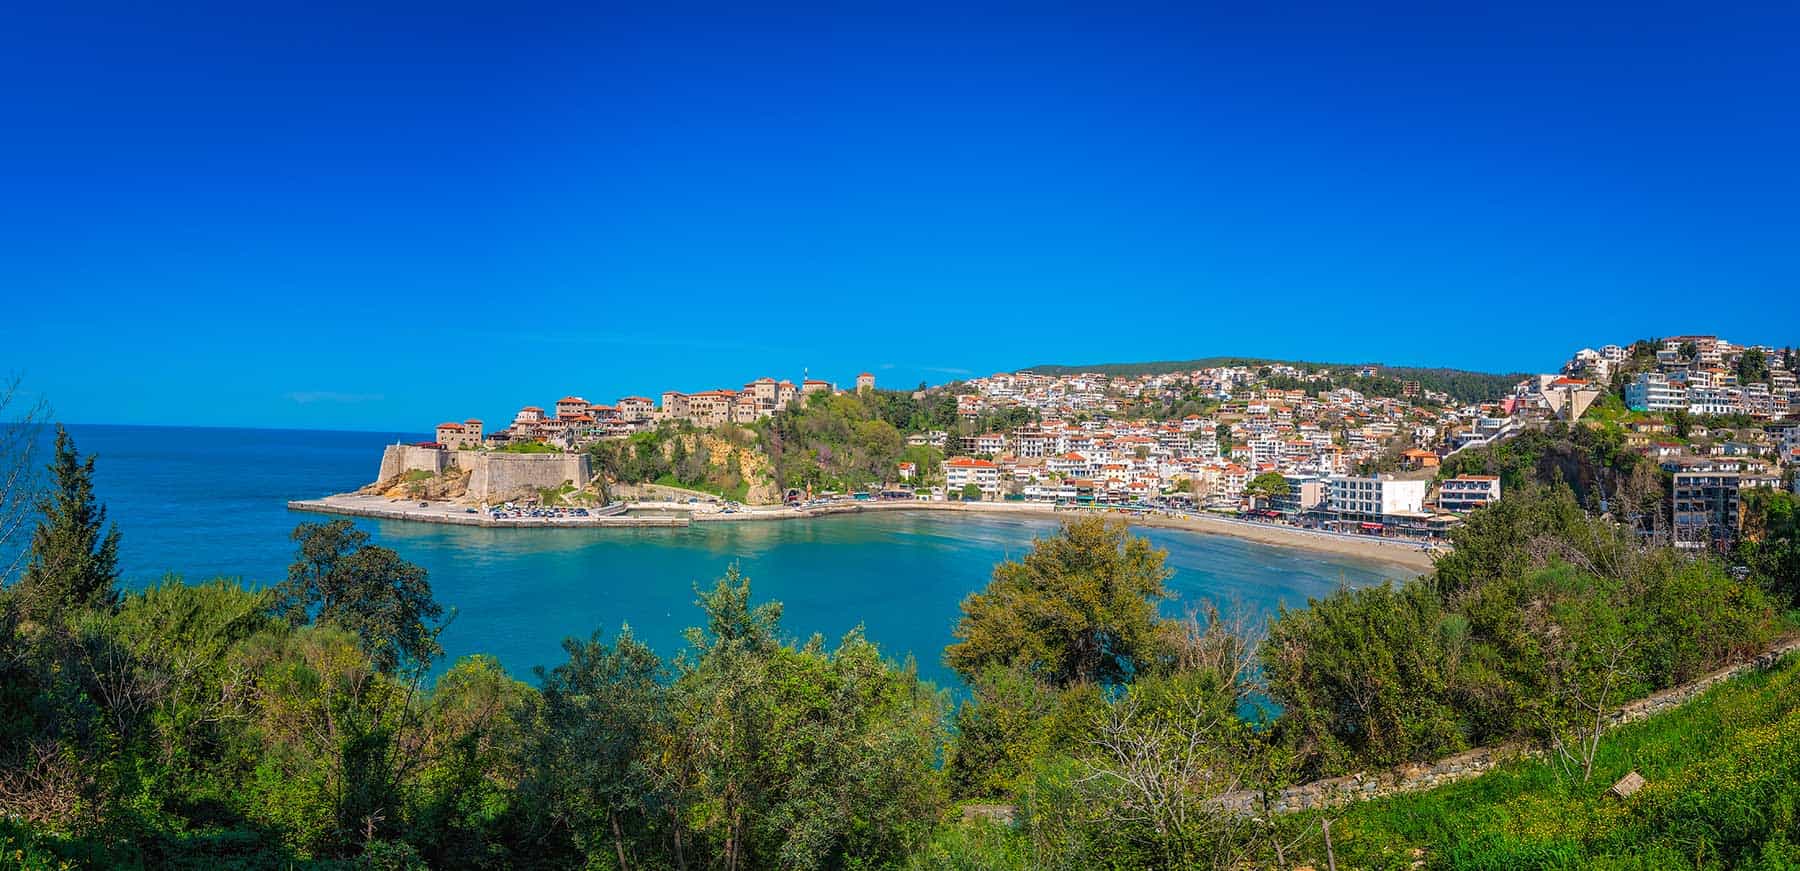 Panoramic view of the old town in Ulcinj